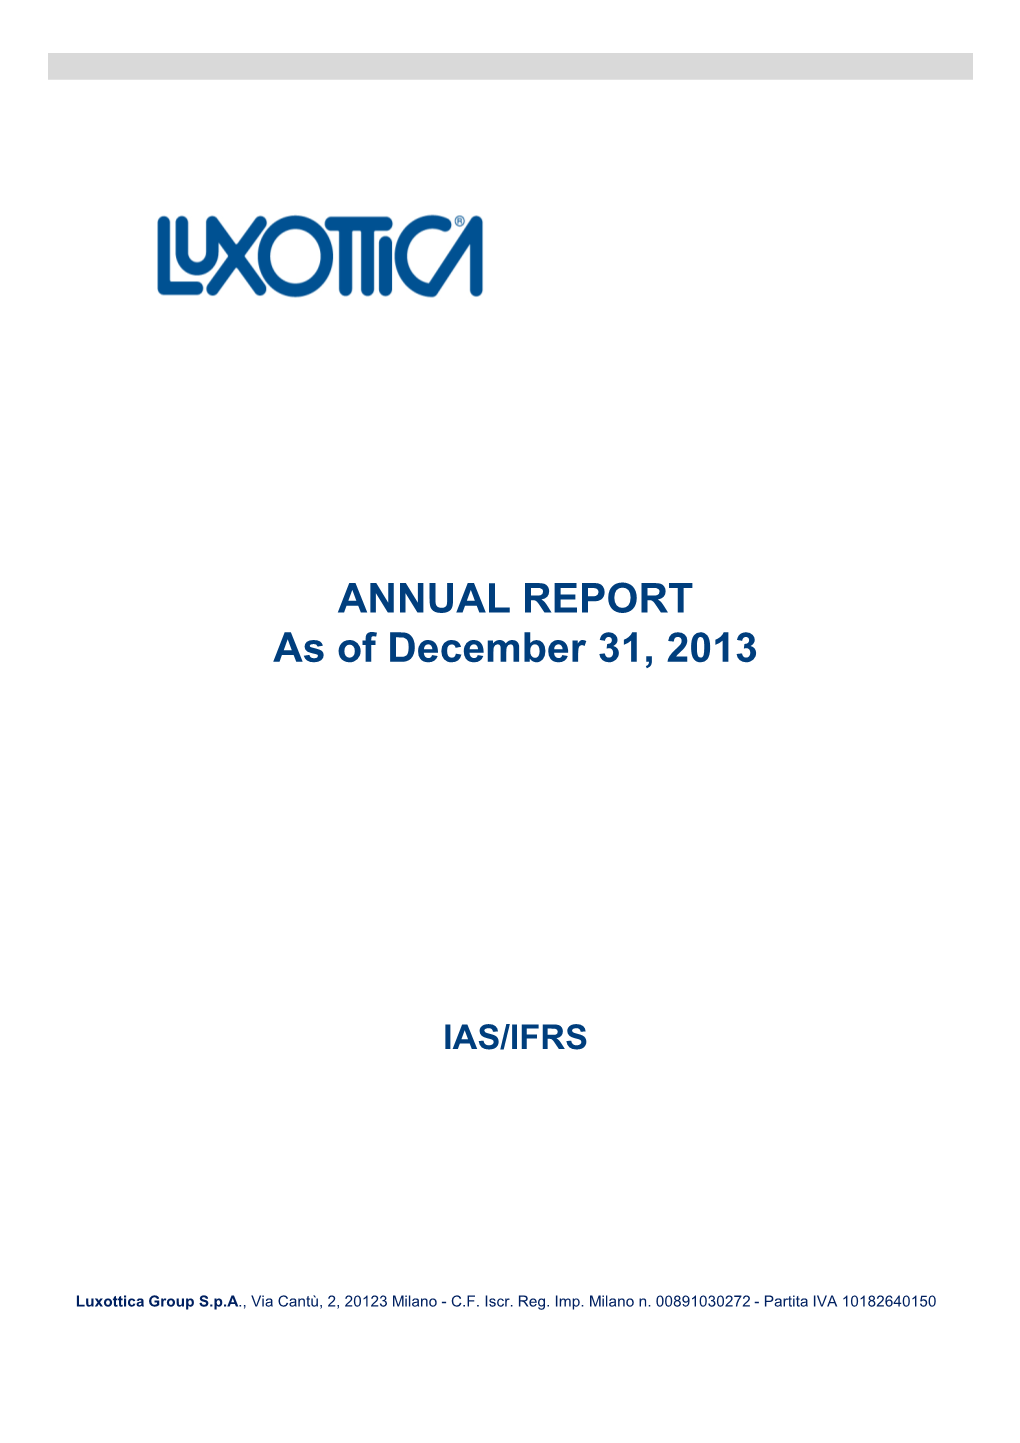 ANNUAL REPORT As of December 31, 2013